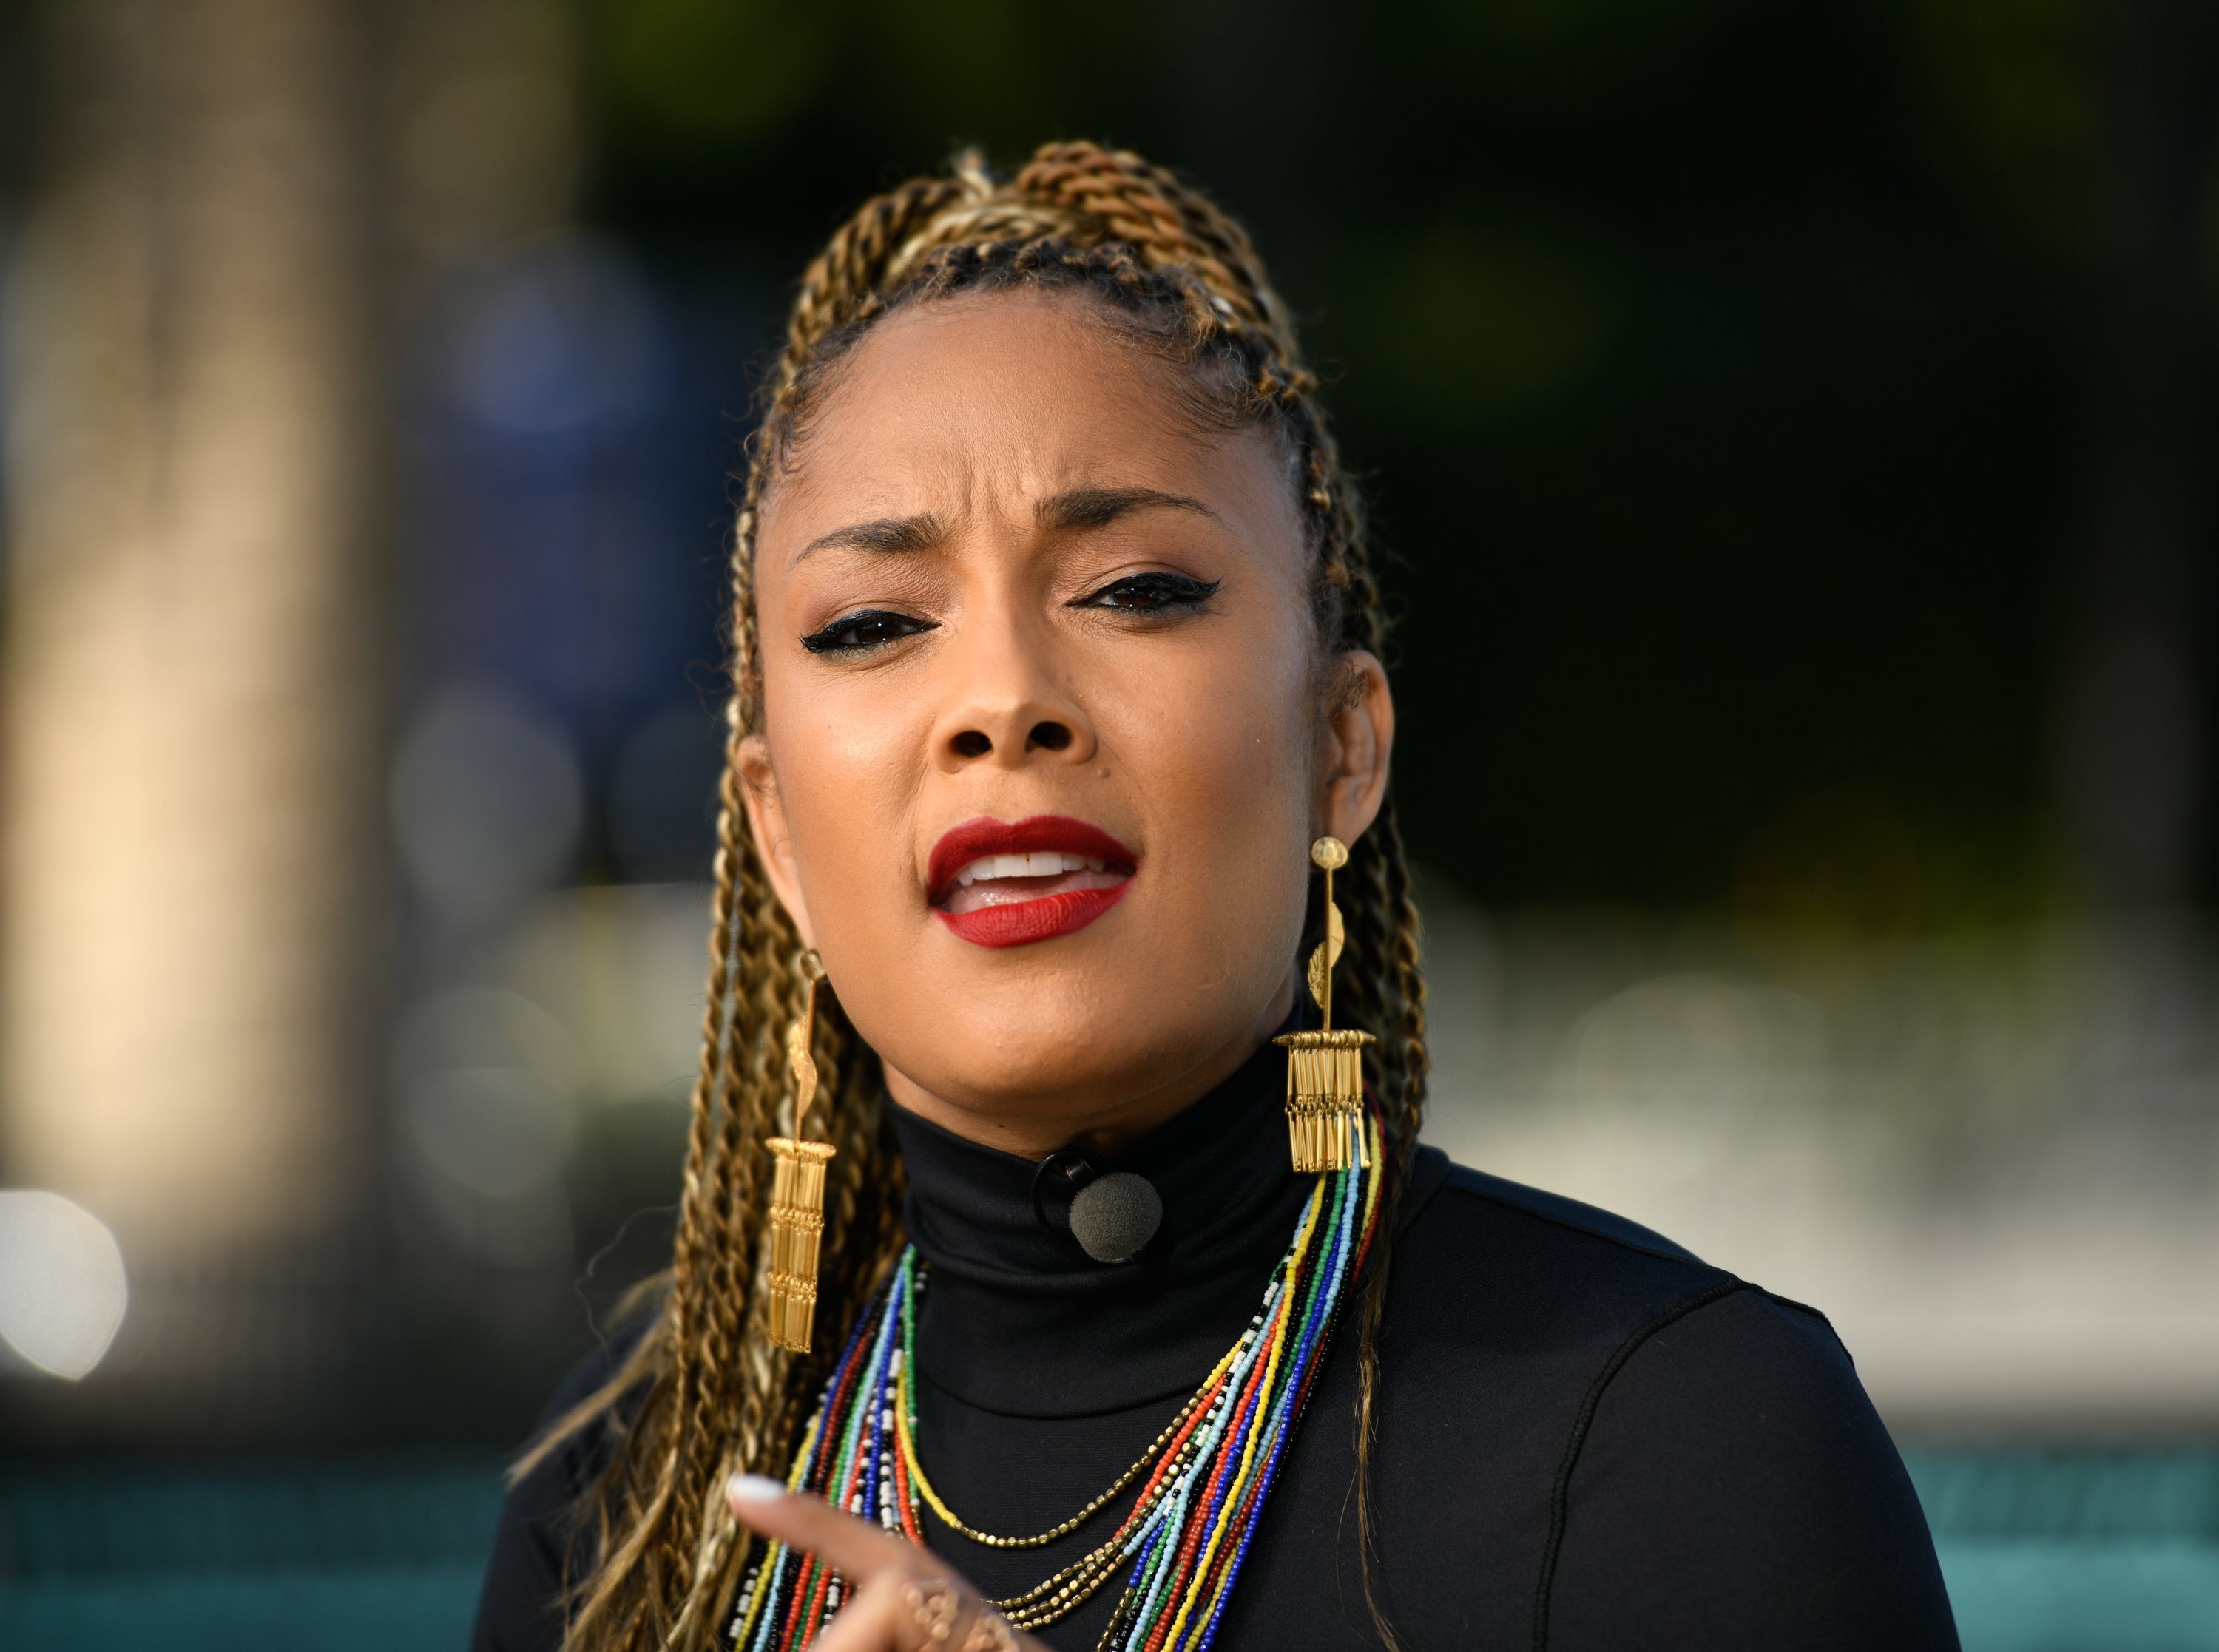 Amanda Seales is photographed discussing some topic. She's wearing a black top with colorful jewelry and a braided hairstyle.